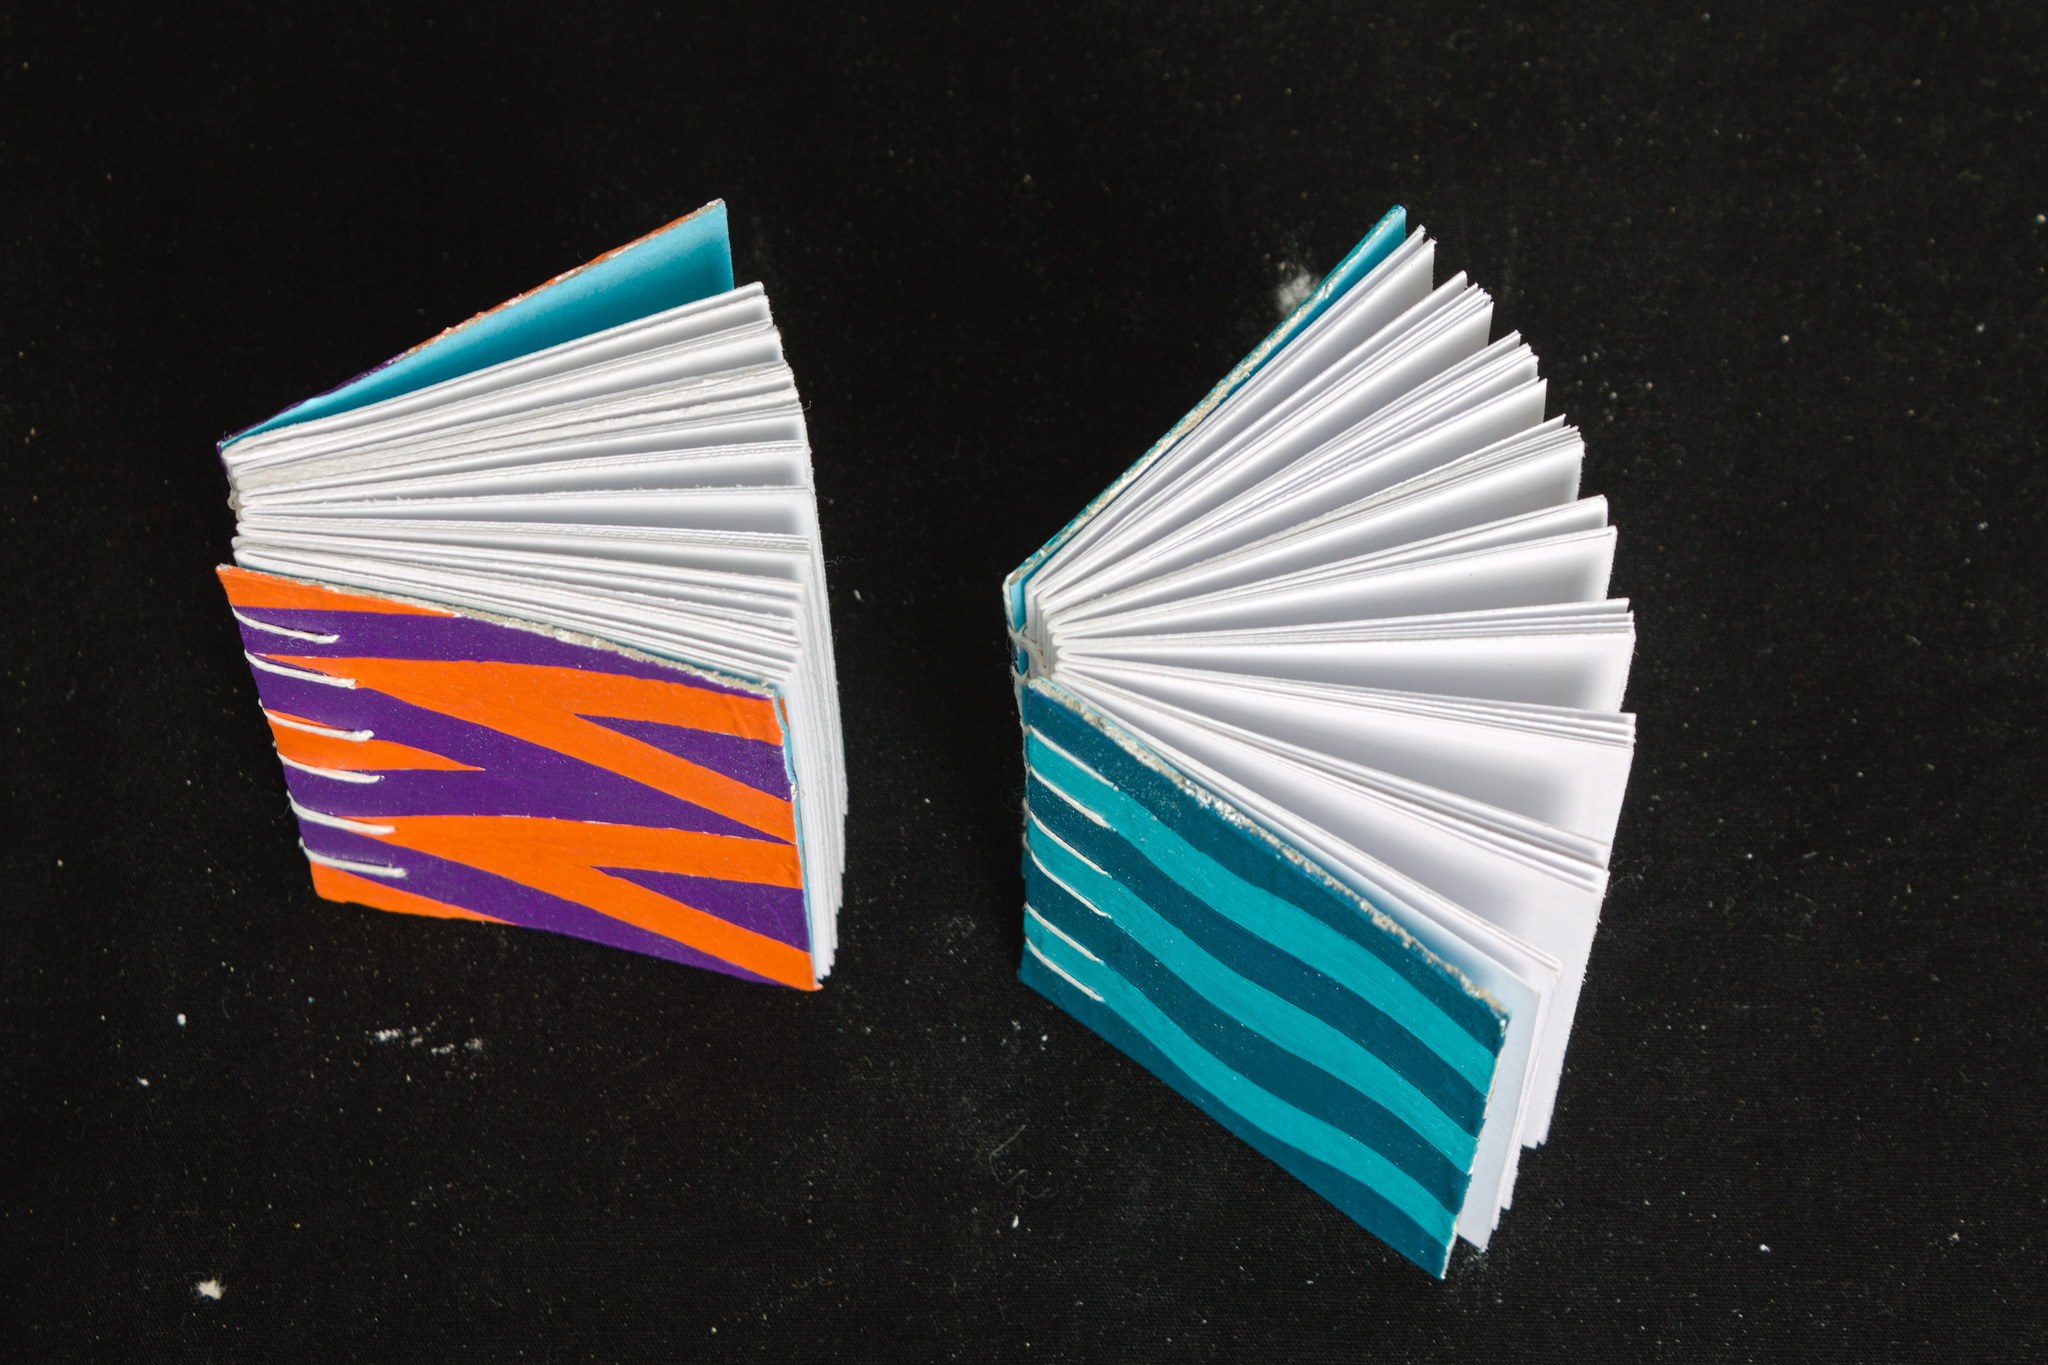 Two coptic bound small books, seen from the top with the pages
somewhat open. One has purple and orange triangles on the cover,
the other one waves in two shades of greenish blue.